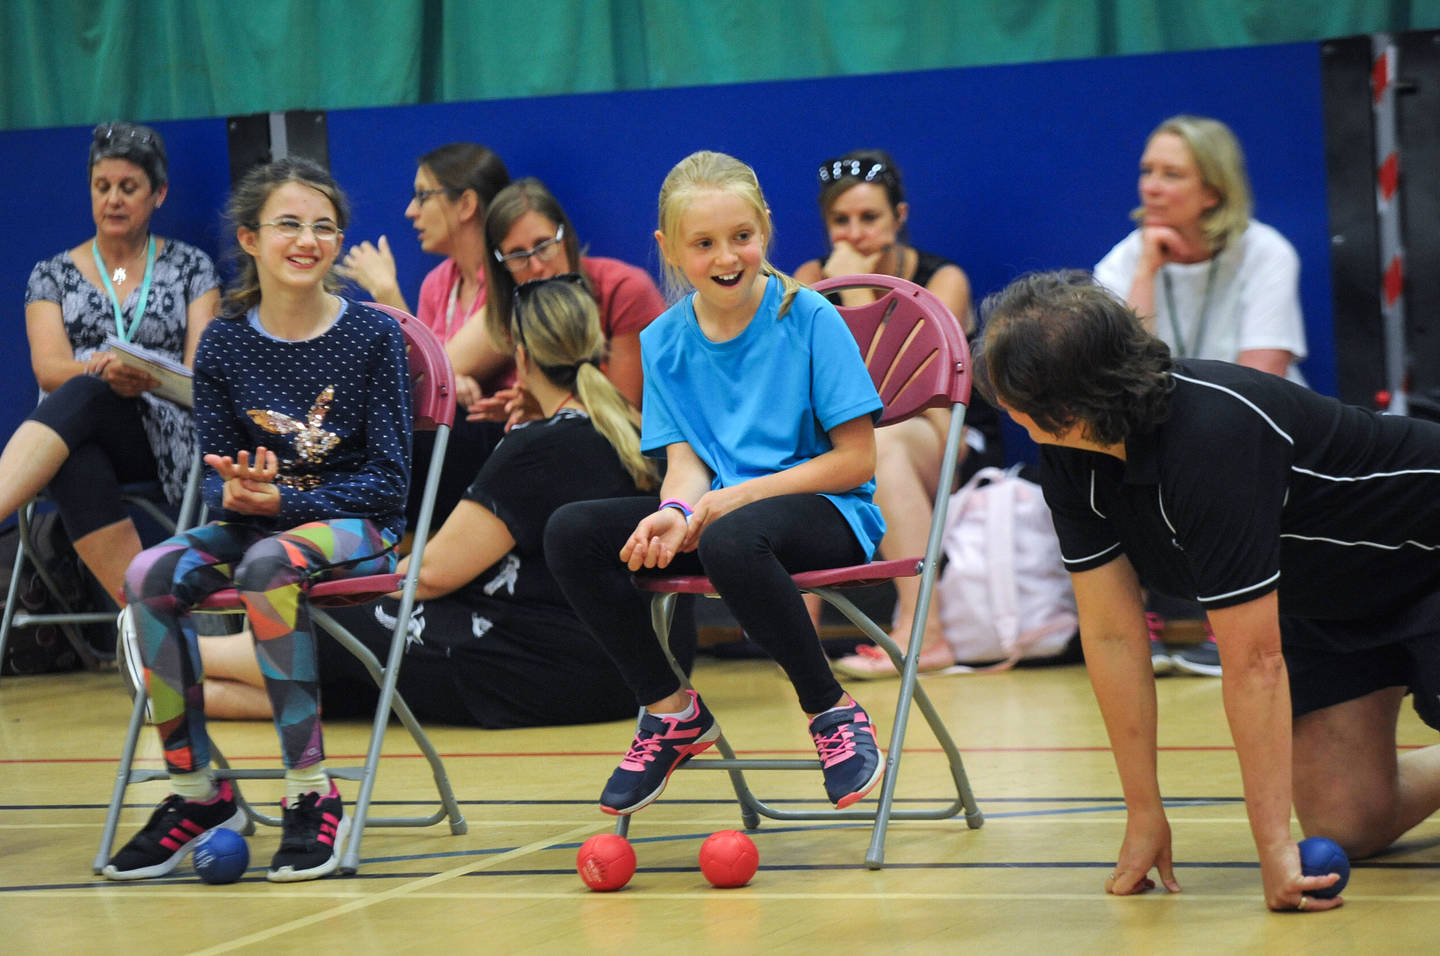 Two girls with visual impairments having fun playing boccia